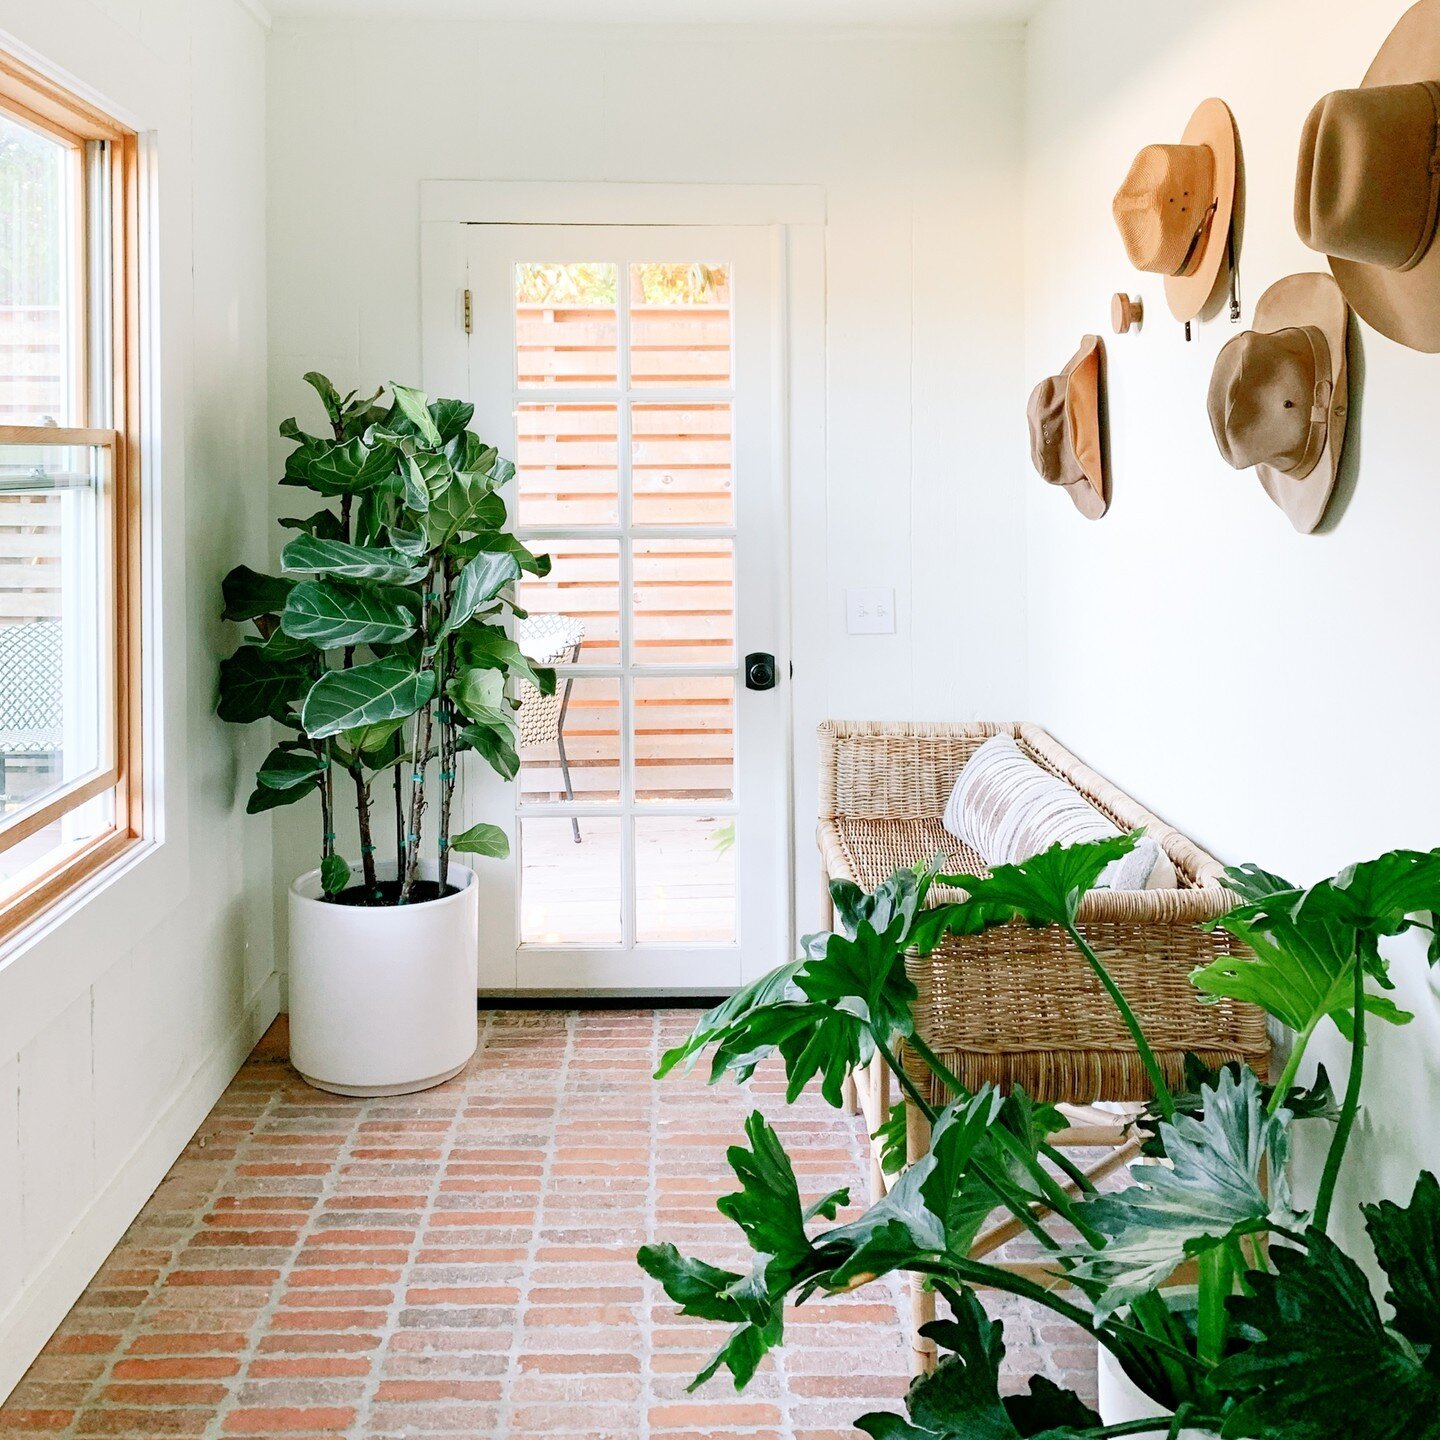 Aren't these indoor plants amazing?? And please 👀these brick floors!  Following up on yesterday's post where I talked about cut flowers and small or faux plants.  If you want to go bigger - and I would certainly encourage you to! - there are so many